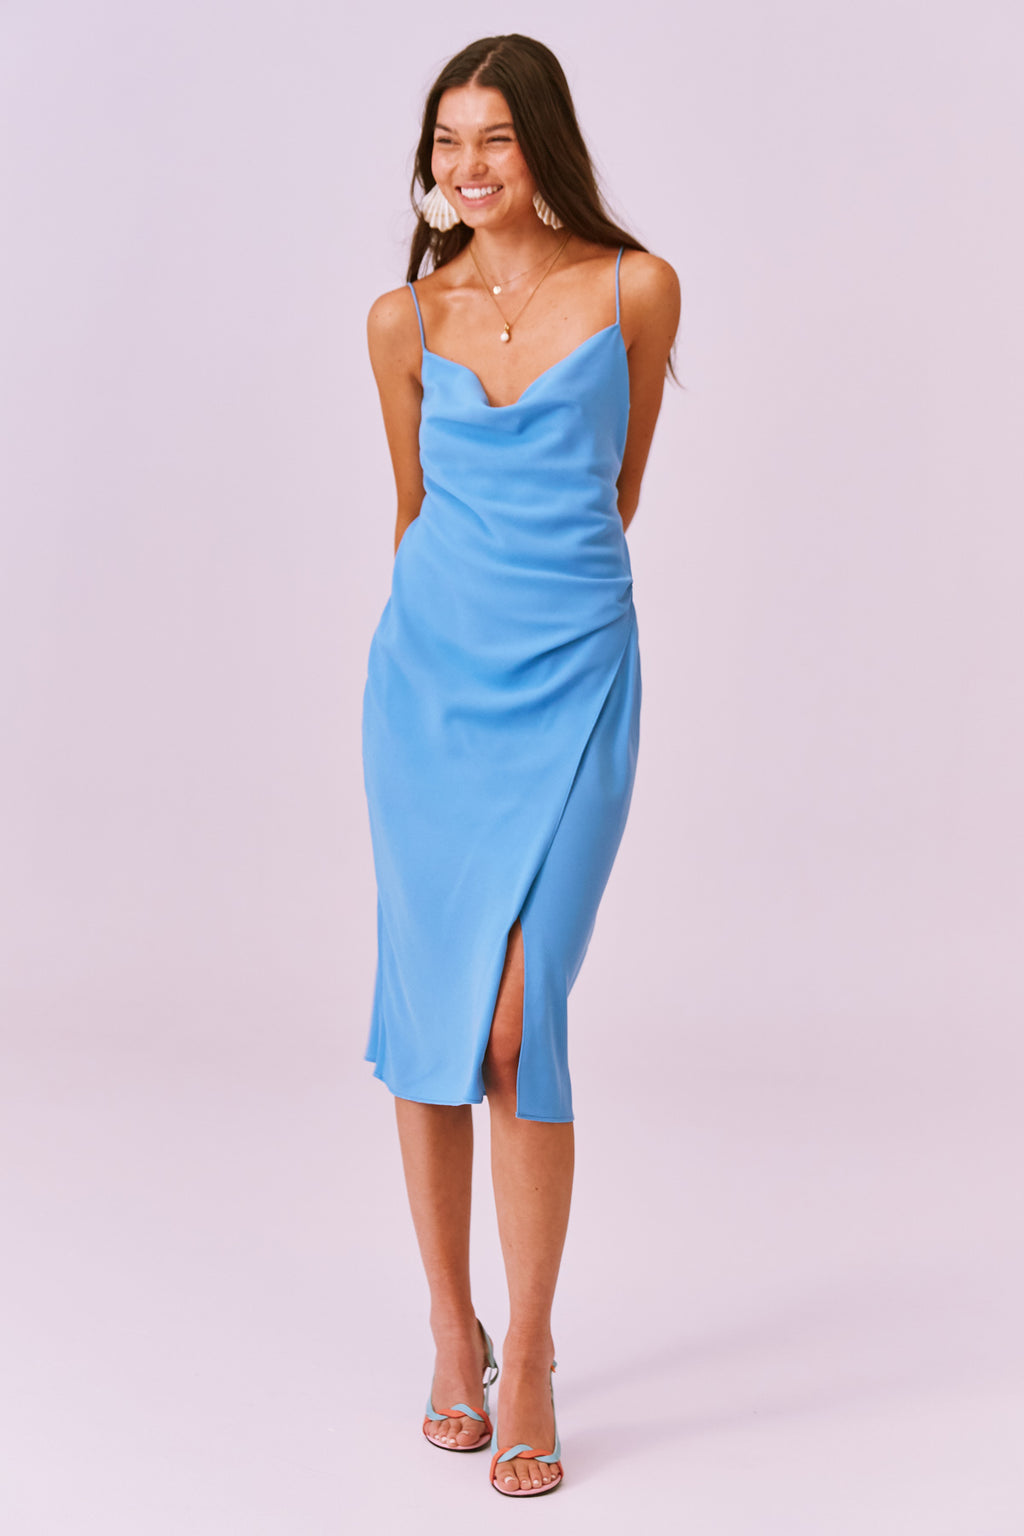 Calypso Midi Dress by Finders Keepers.